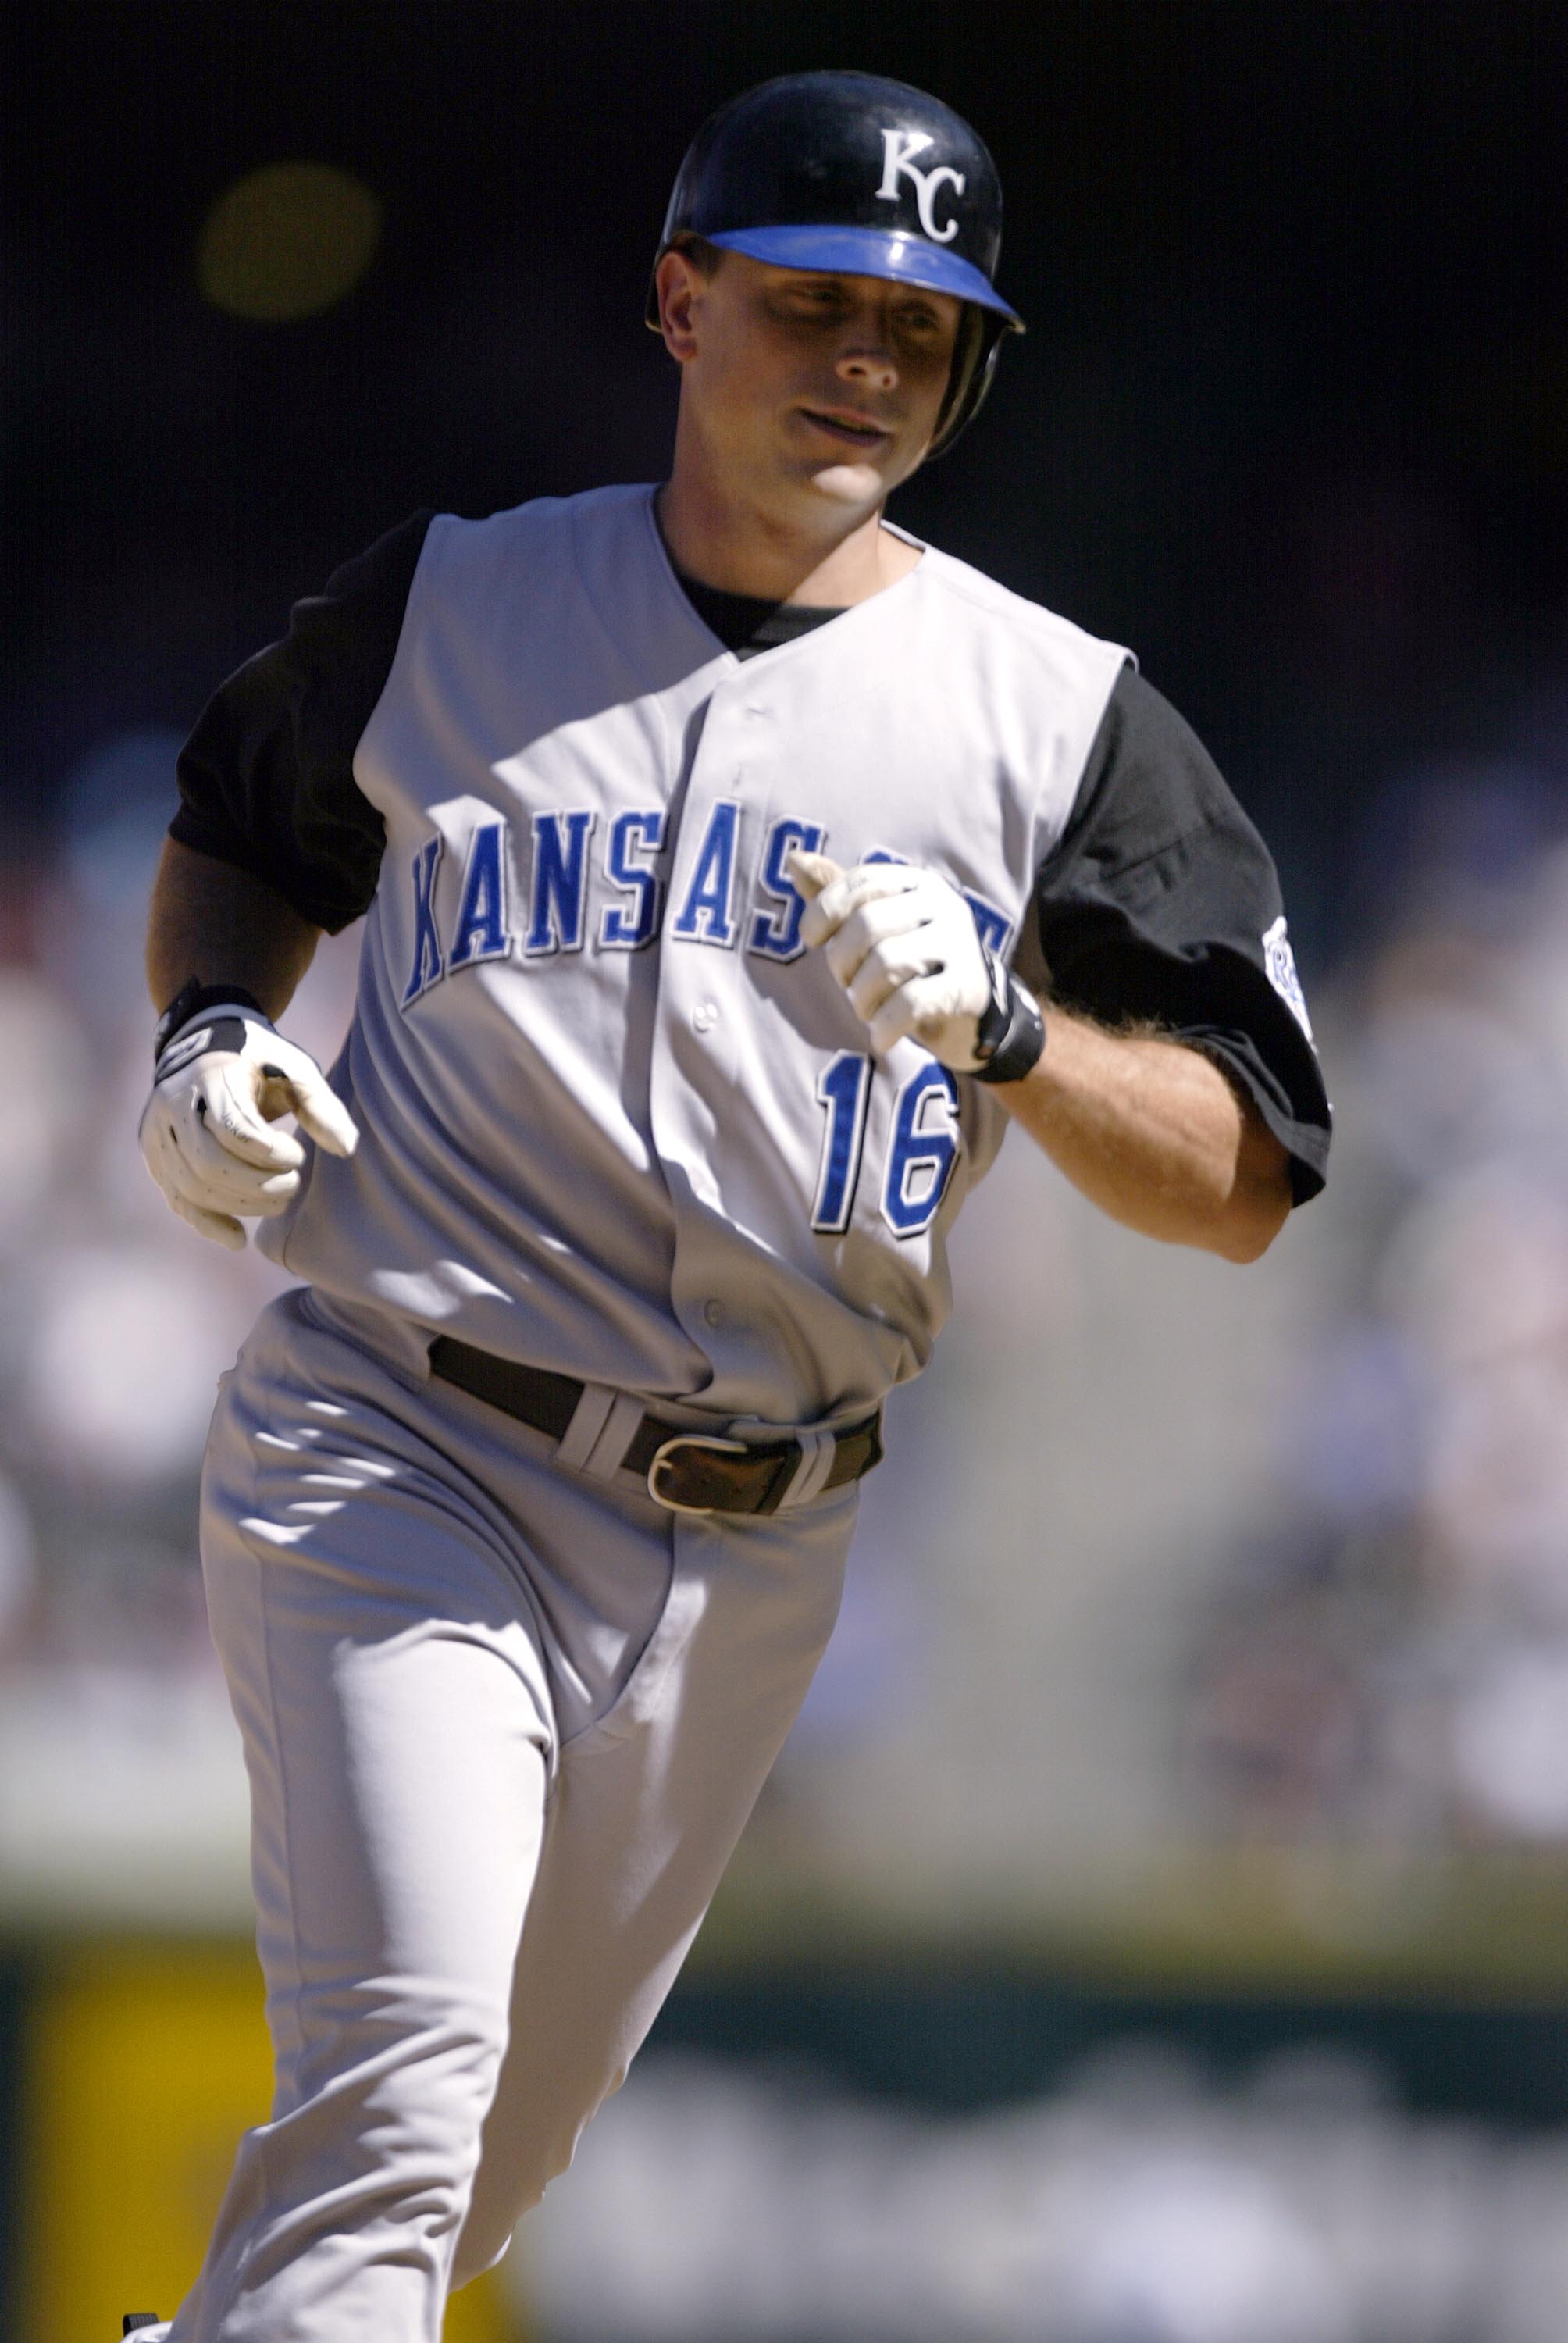 Best Royals players by uniform number